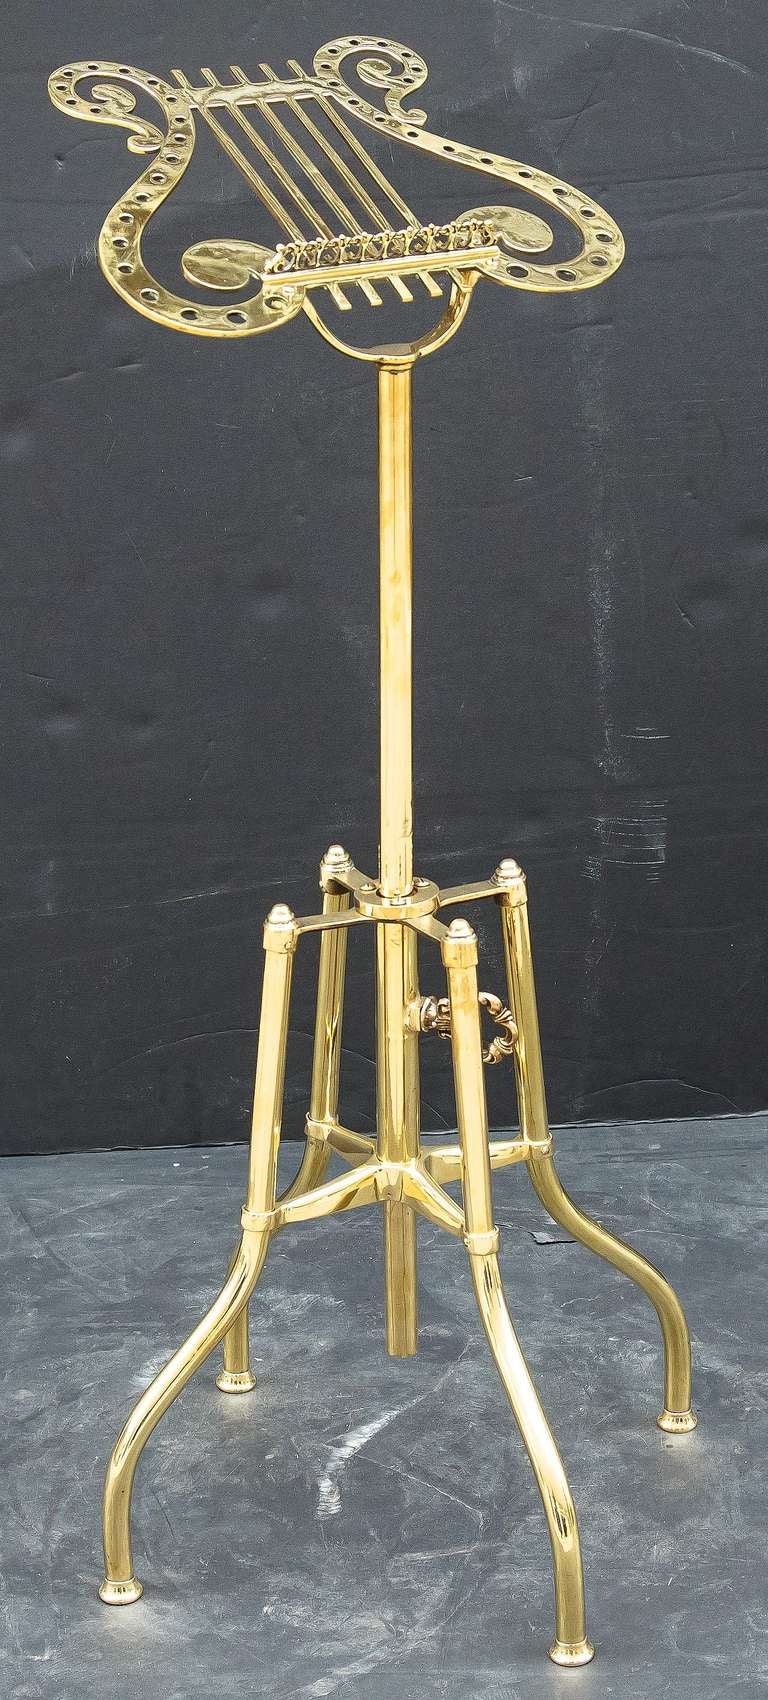 A handsome English music stand of brass featuring a lyre-shaped folio easel mounted to a four-legged stand, allowing for adjustable height of between 33.5 (down) to 43